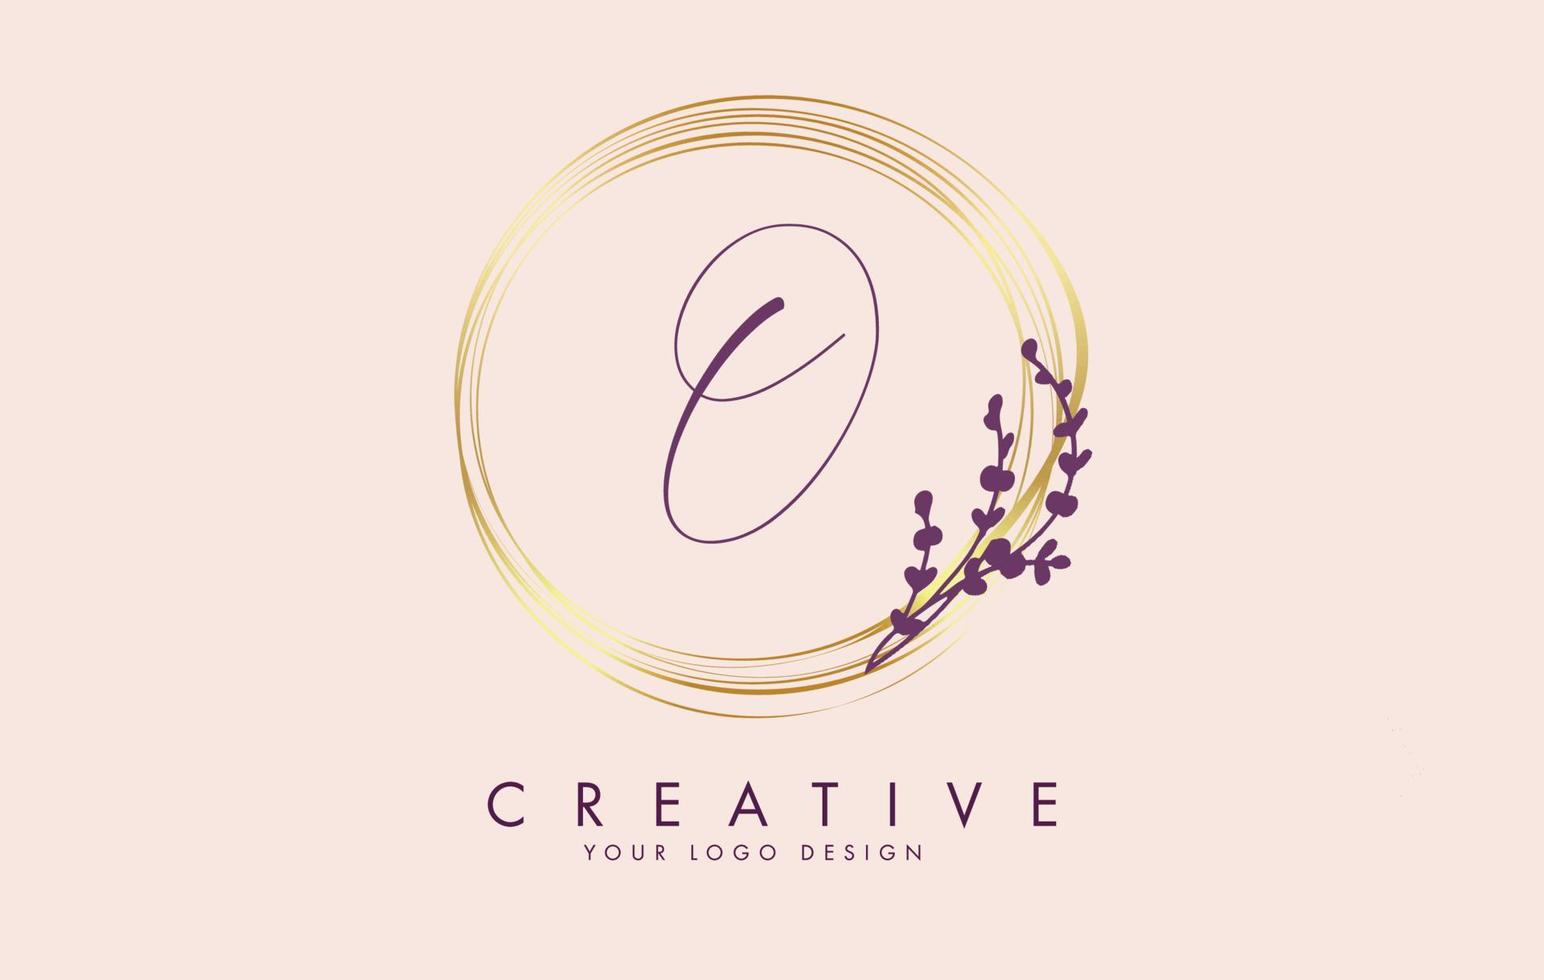 Handwritten O Letter logo design with golden circles and purple leaves on branches around. Vector Illustration with  O letter.